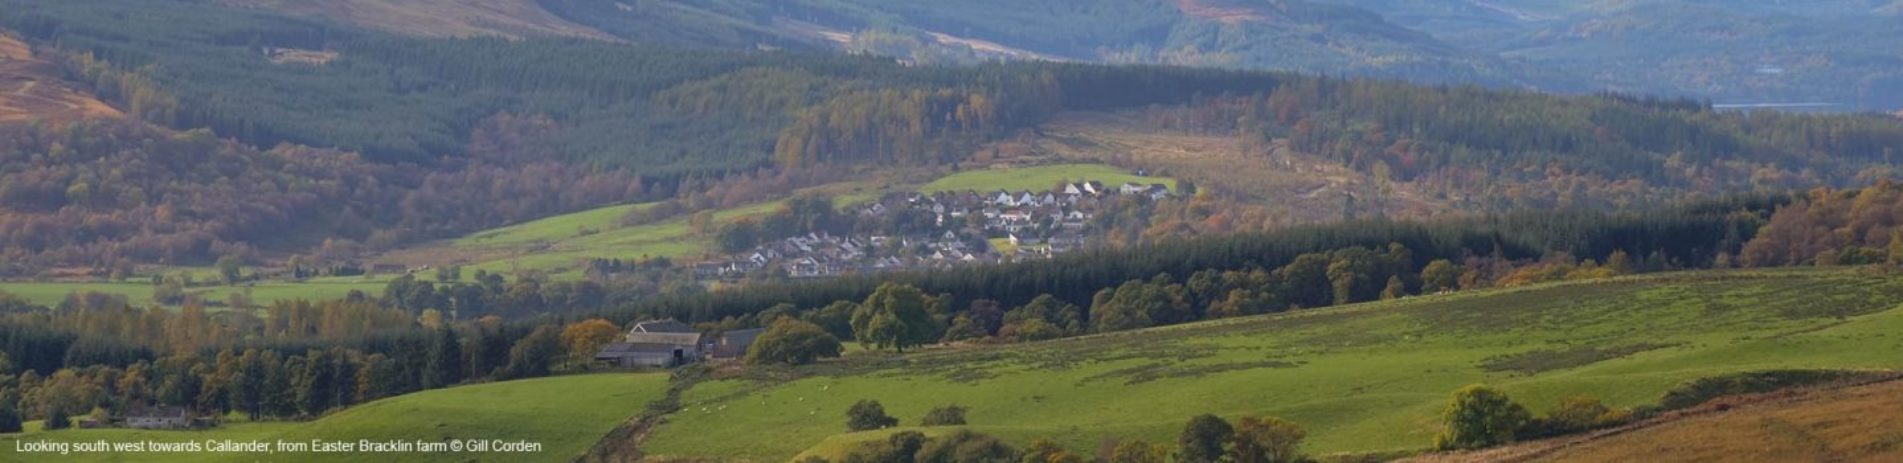 panorama-of-callander-surrounded-by-forests-seen-from-easter-bracklinn